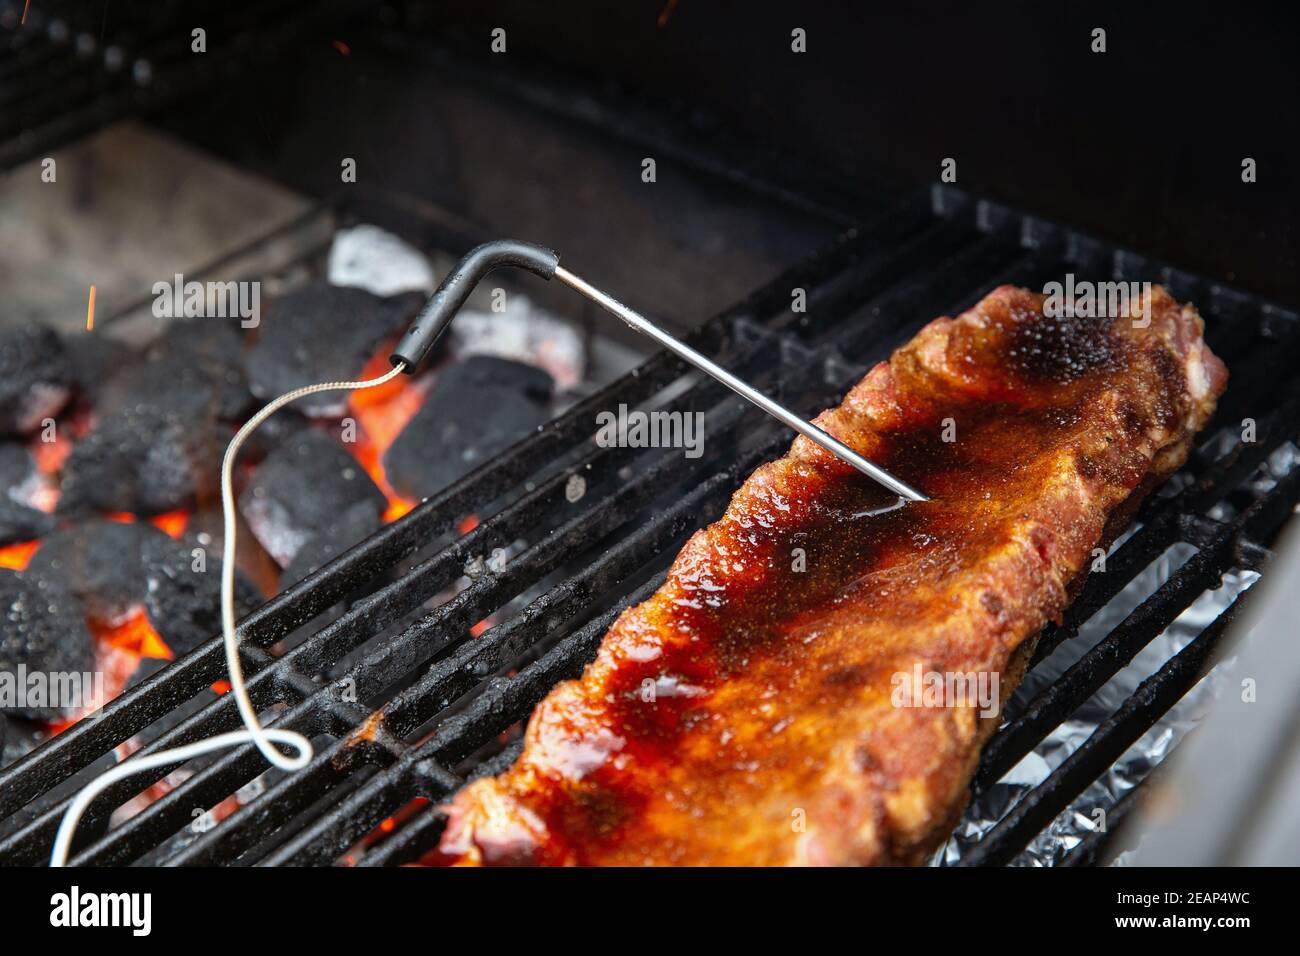 https://c8.alamy.com/comp/2EAP4WC/digital-thermometer-bbq-grill-barbecue-for-beaf-steak-and-spare-rib-ant-other-meat-measuring-temperature-2EAP4WC.jpg